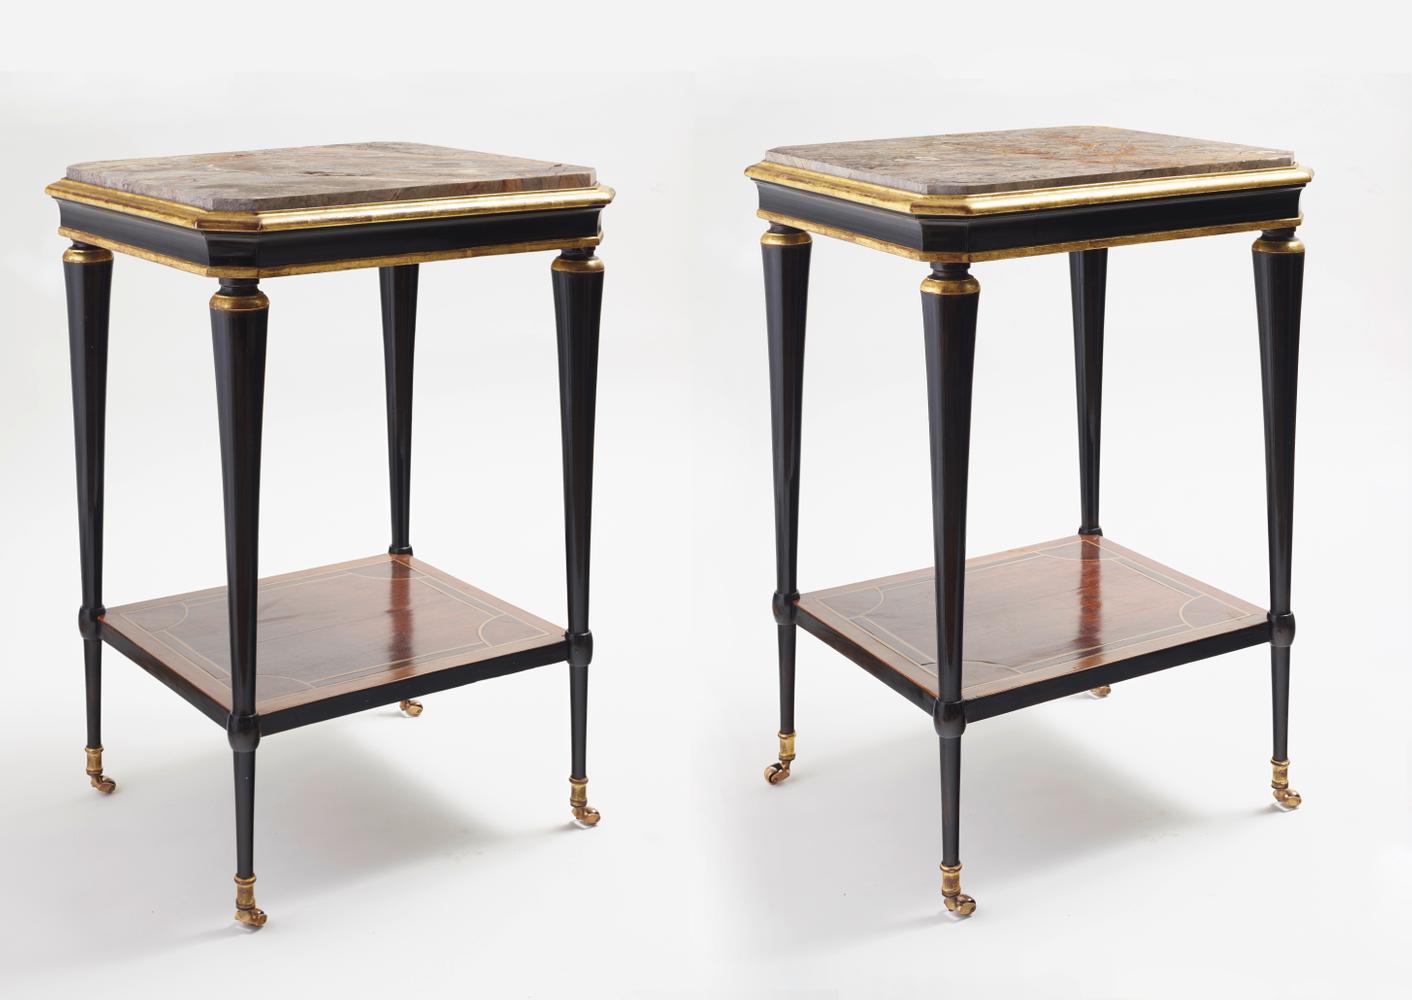 PAIR OF ITALIAN NEOCLASSICAL STYLE TABES, CIRCA 1830